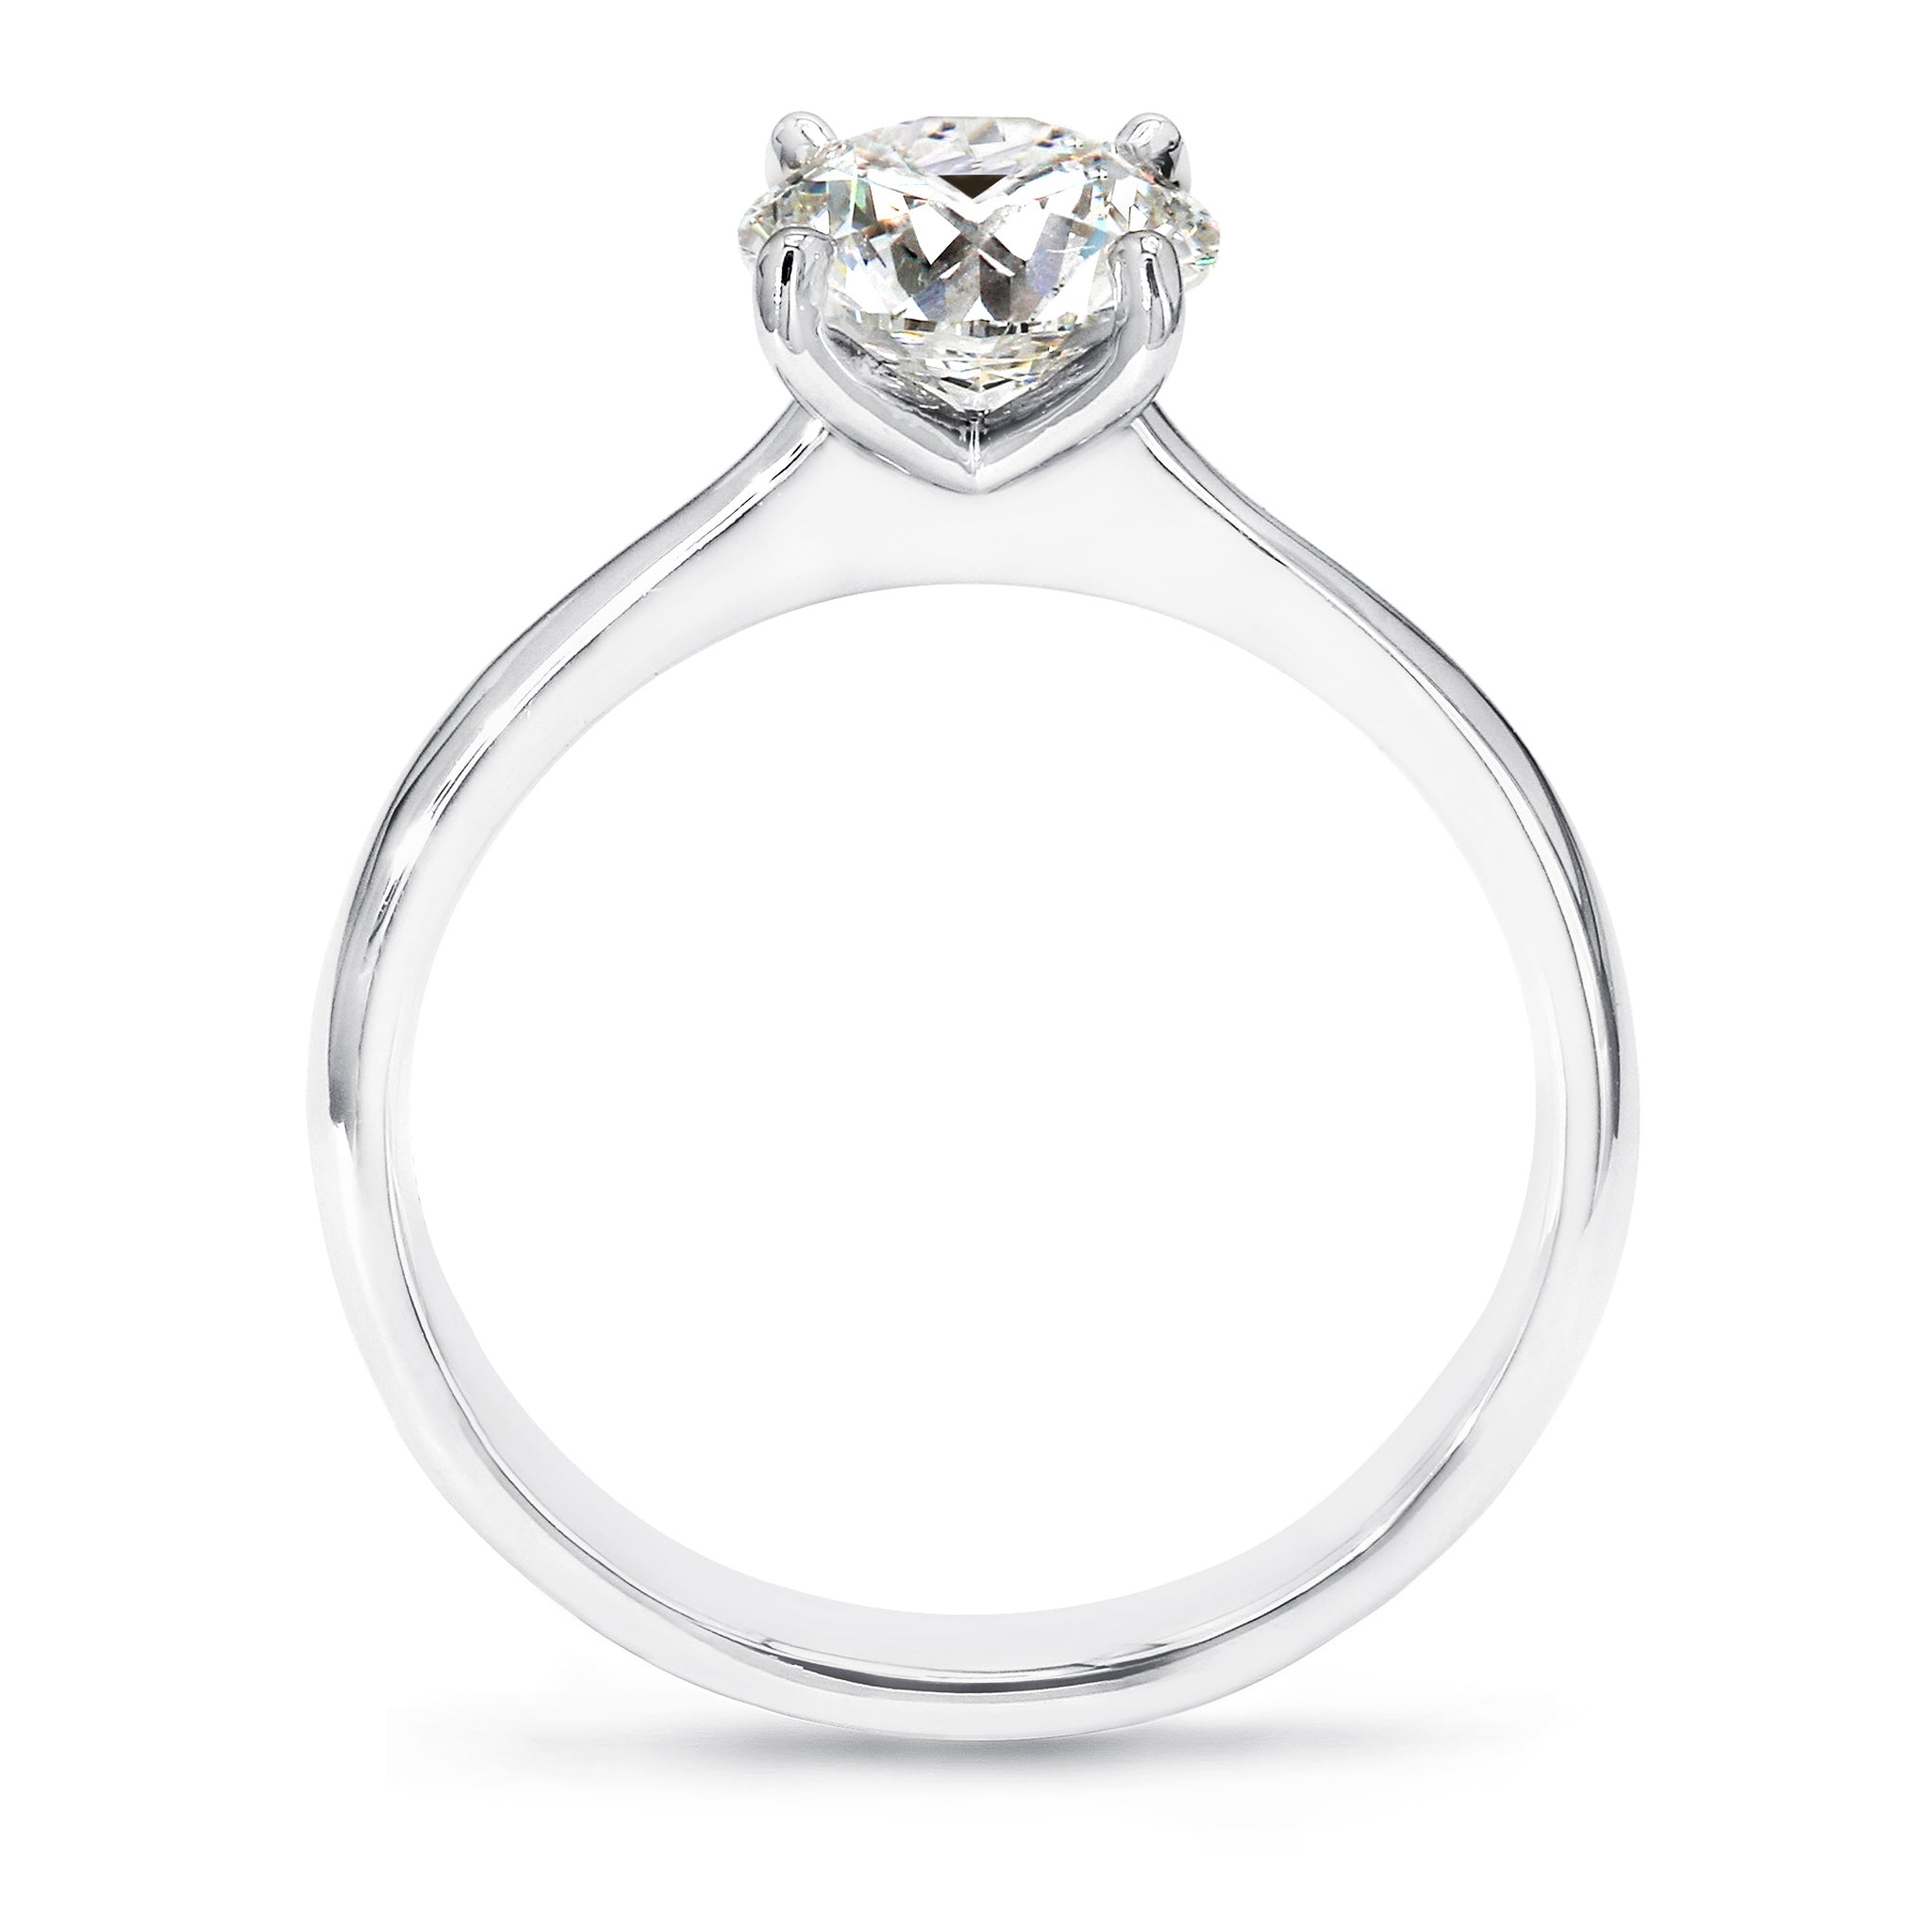 Shimansky - Victoria Solitaire Diamond Ring 1.00ct crafted in Platinum